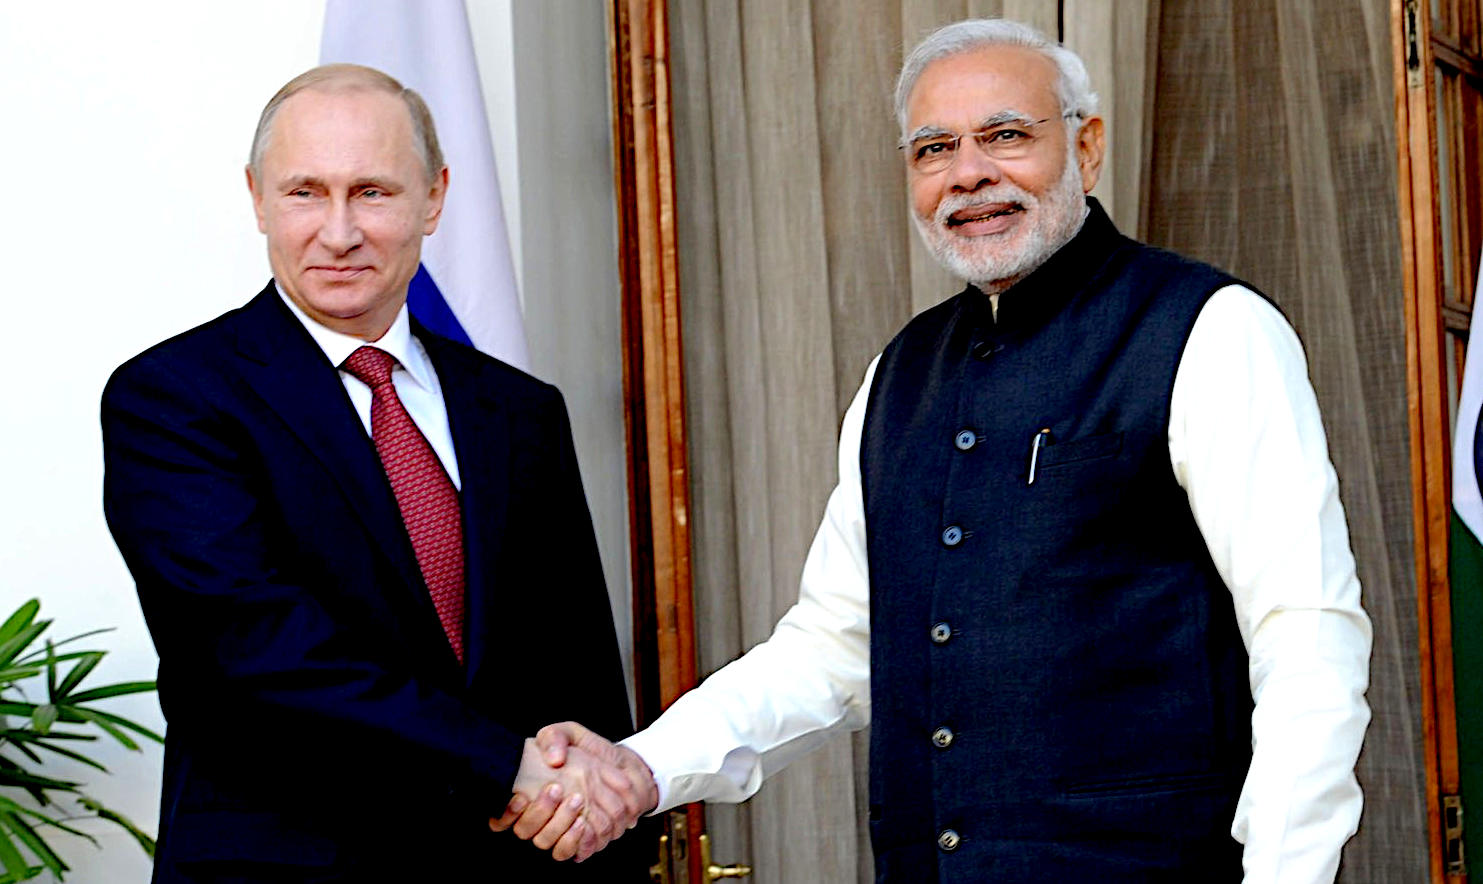 Vladimir Putin and Narendra Modi, no doubt shaking hands on some deal, one of which could have been the continued supply of fossil fuels to underpin the rapid industrial expansion of India's economy, nuclear navy and space program. Despite, those exports financing Russia's invasion of Ukraine.